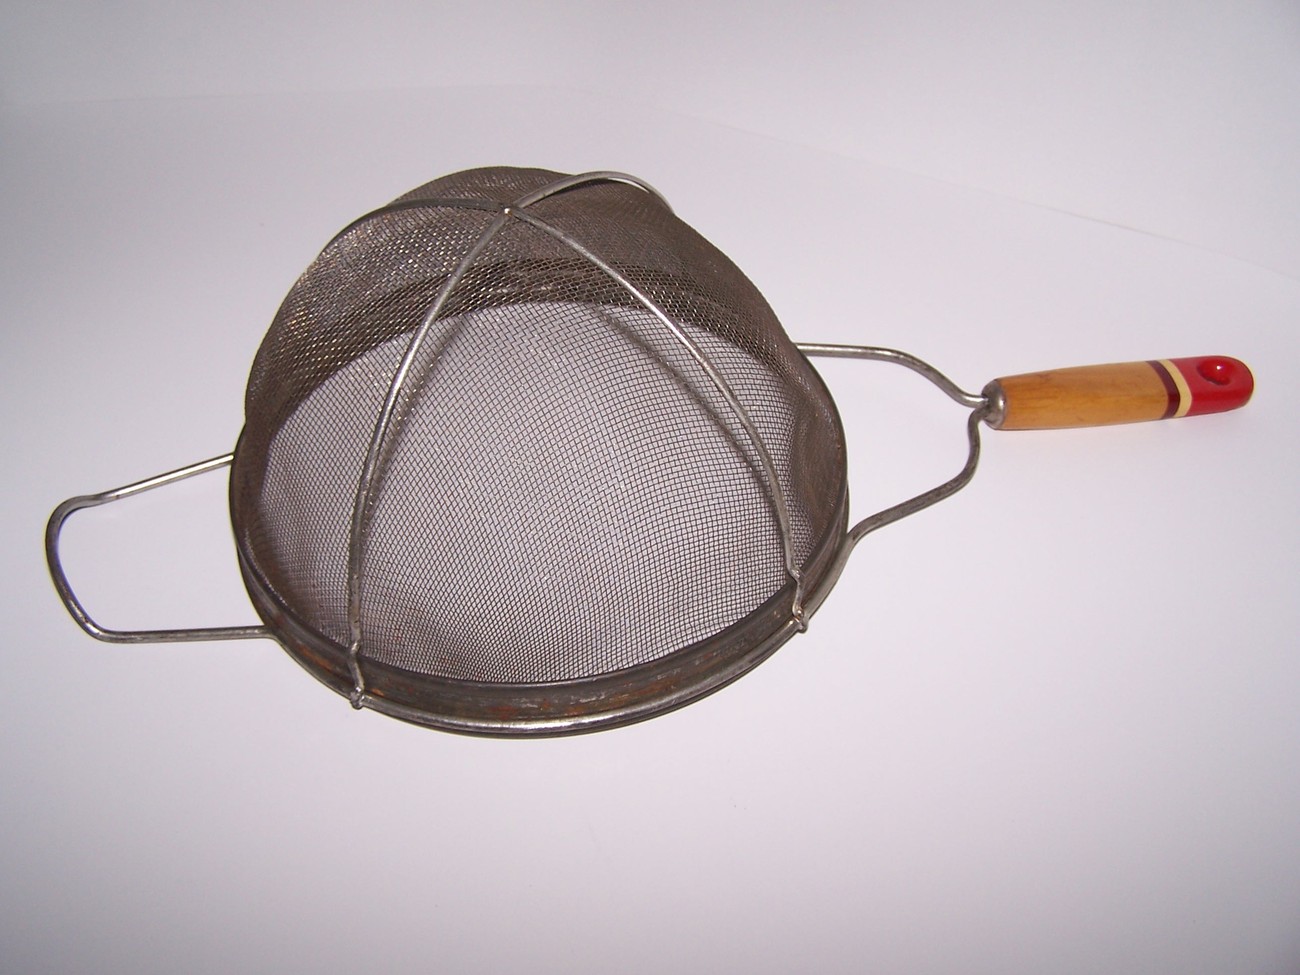 Large Vintage Strainer With Painted Wooden Handle Colanders Strainers